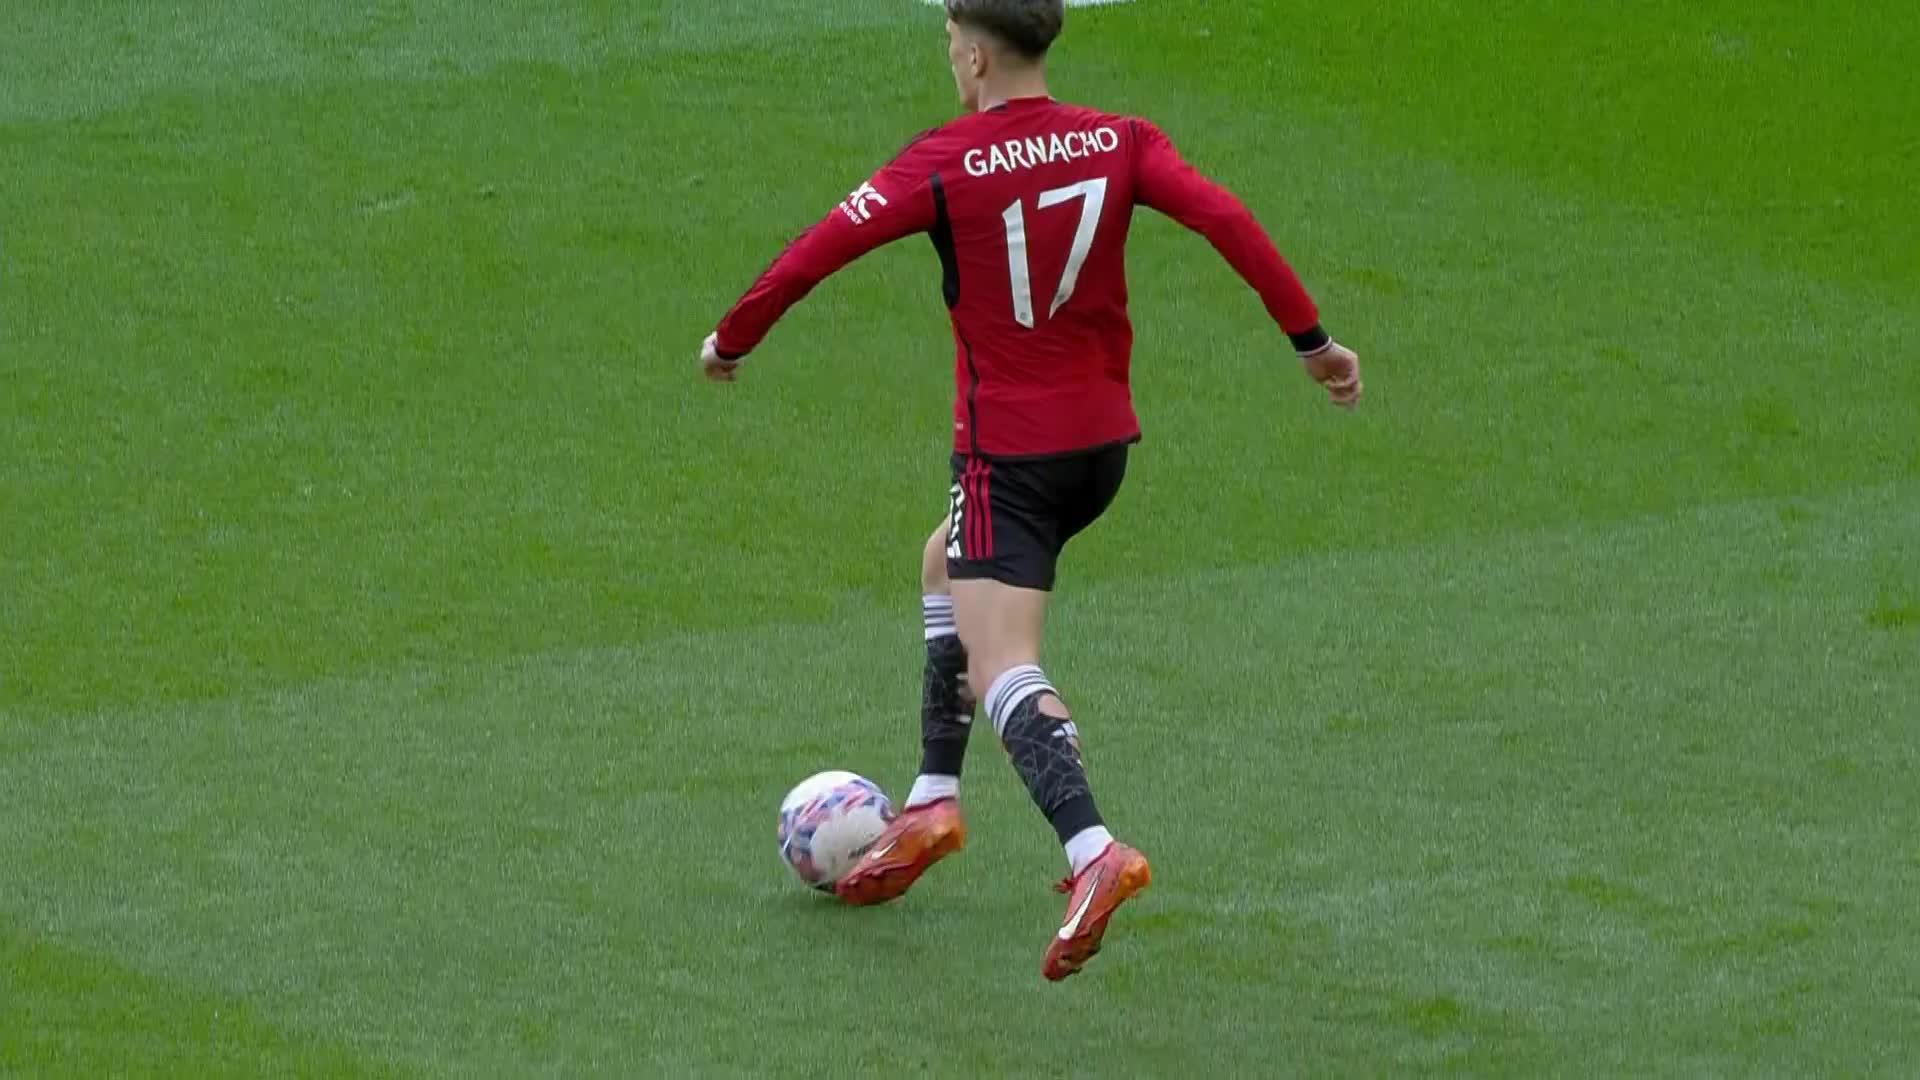 Watch: New angle shows just how outrageous Bruno Fernandes’ no-look assist for Mainoo was